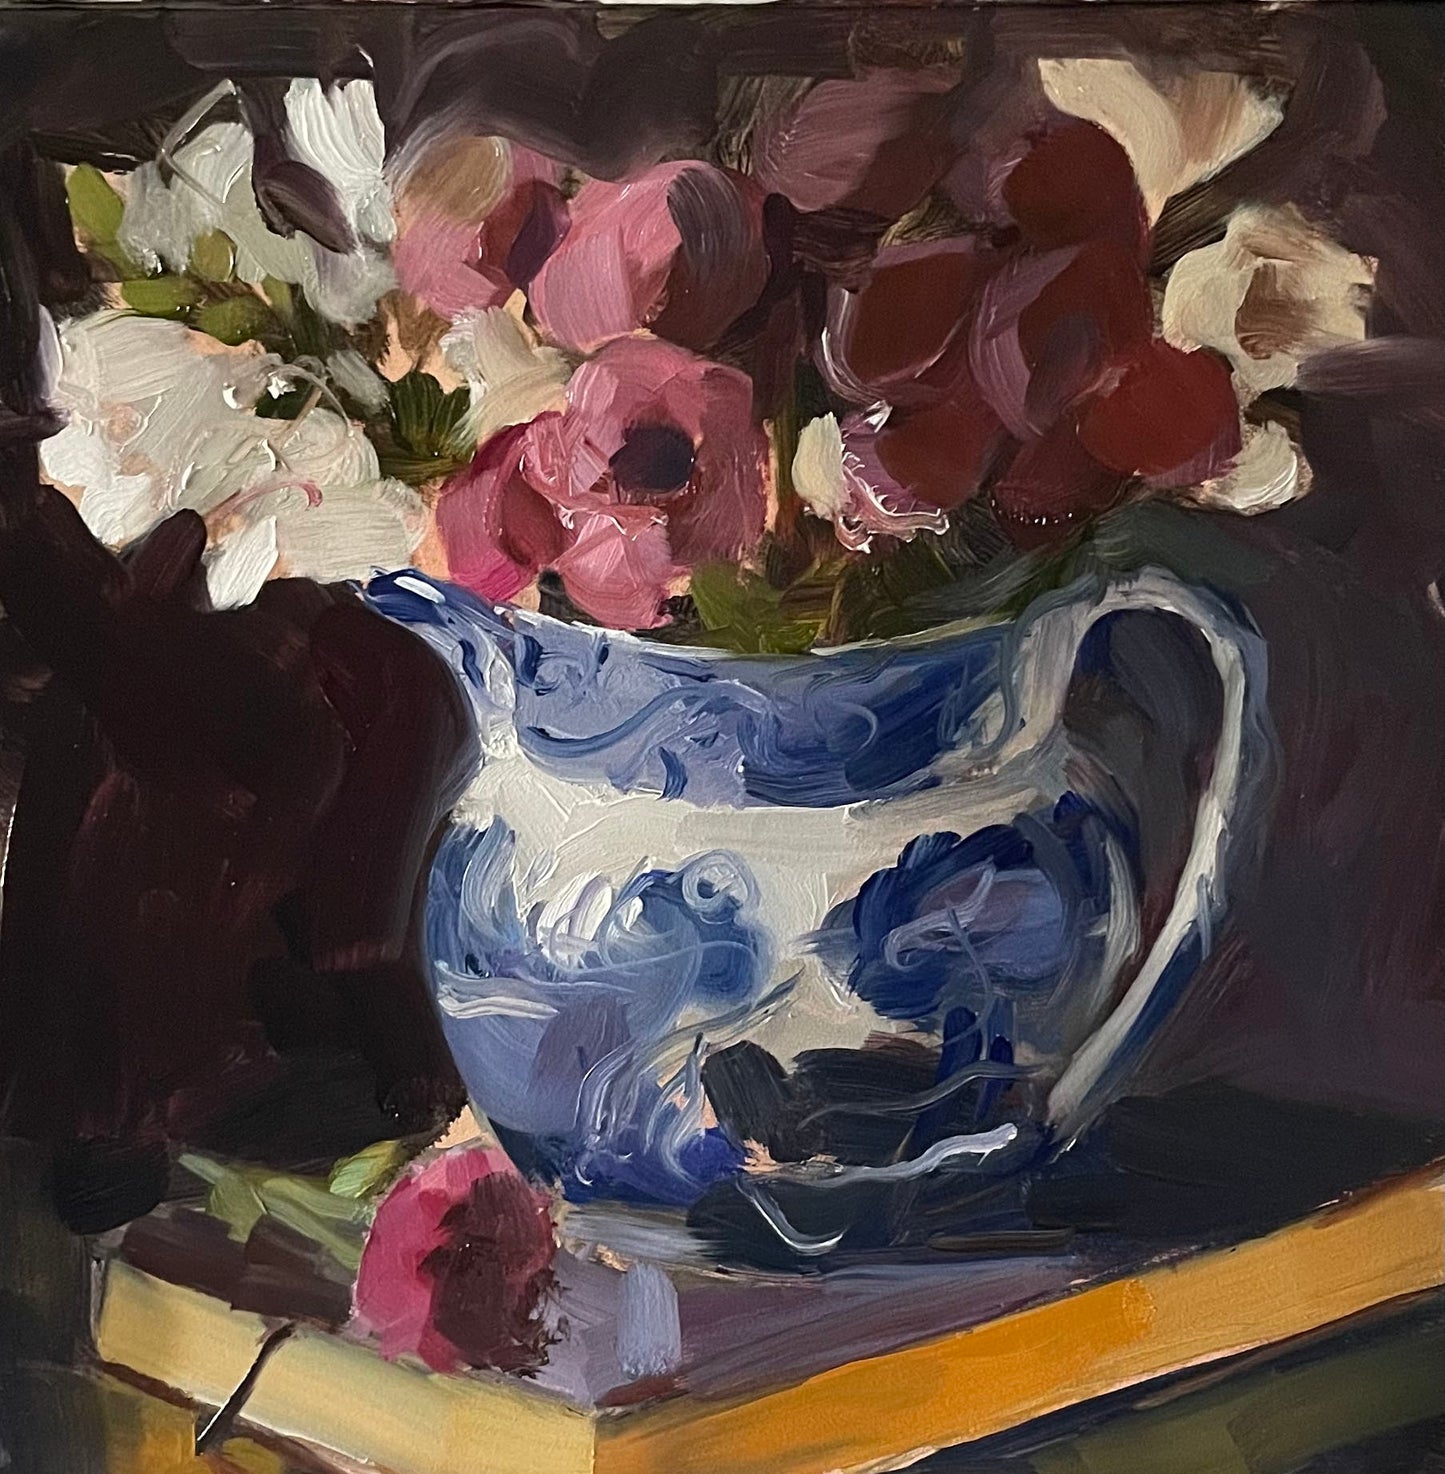 Garden flowers in a blue and white jug still life oil painting